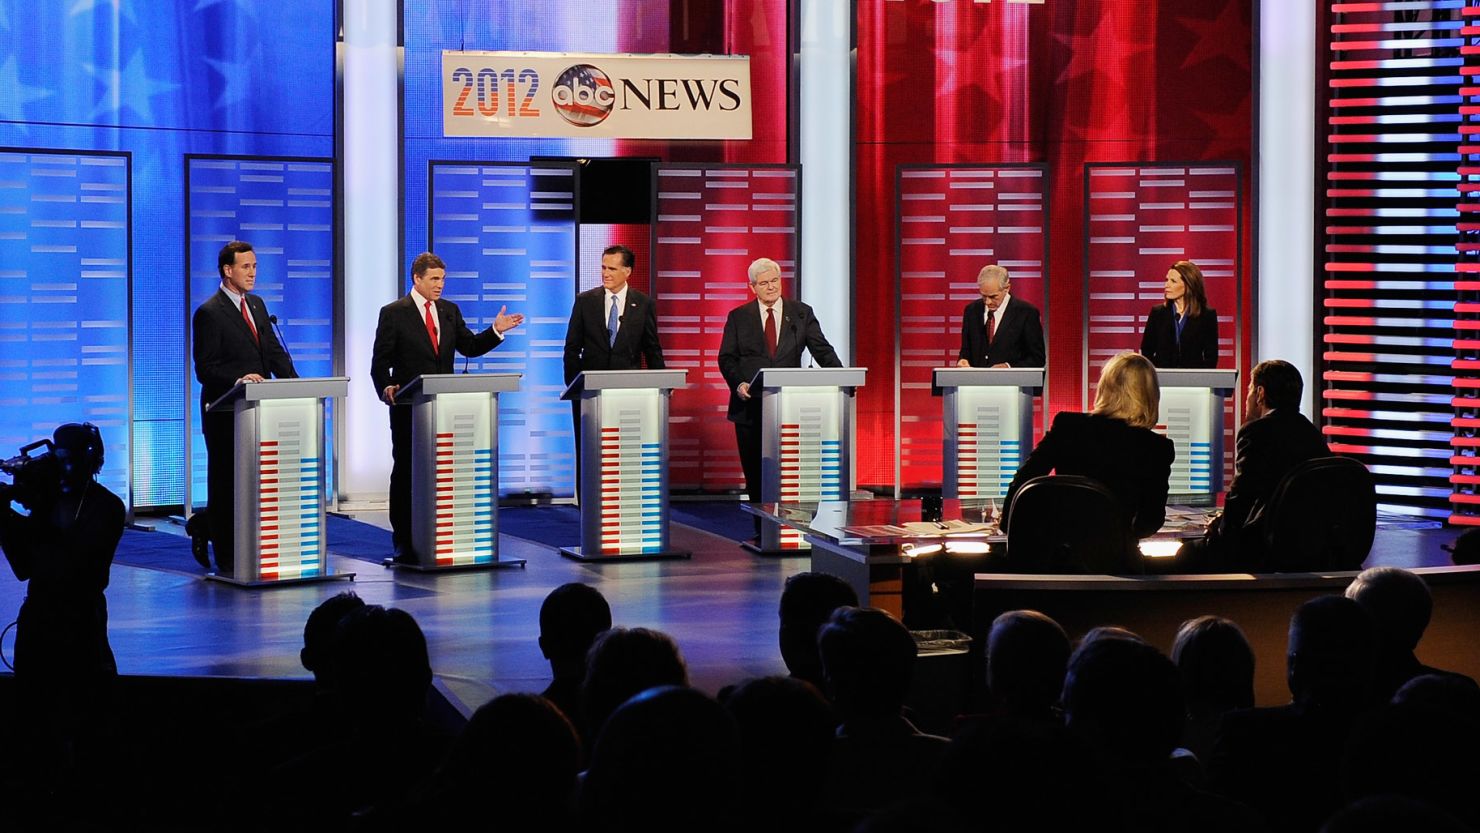 Rick Santorum, from left, Rick Perry, Mitt Romney, Newt Gingrich, Ron Paul and Michele Bachmann debate in Iowa on Saturday.